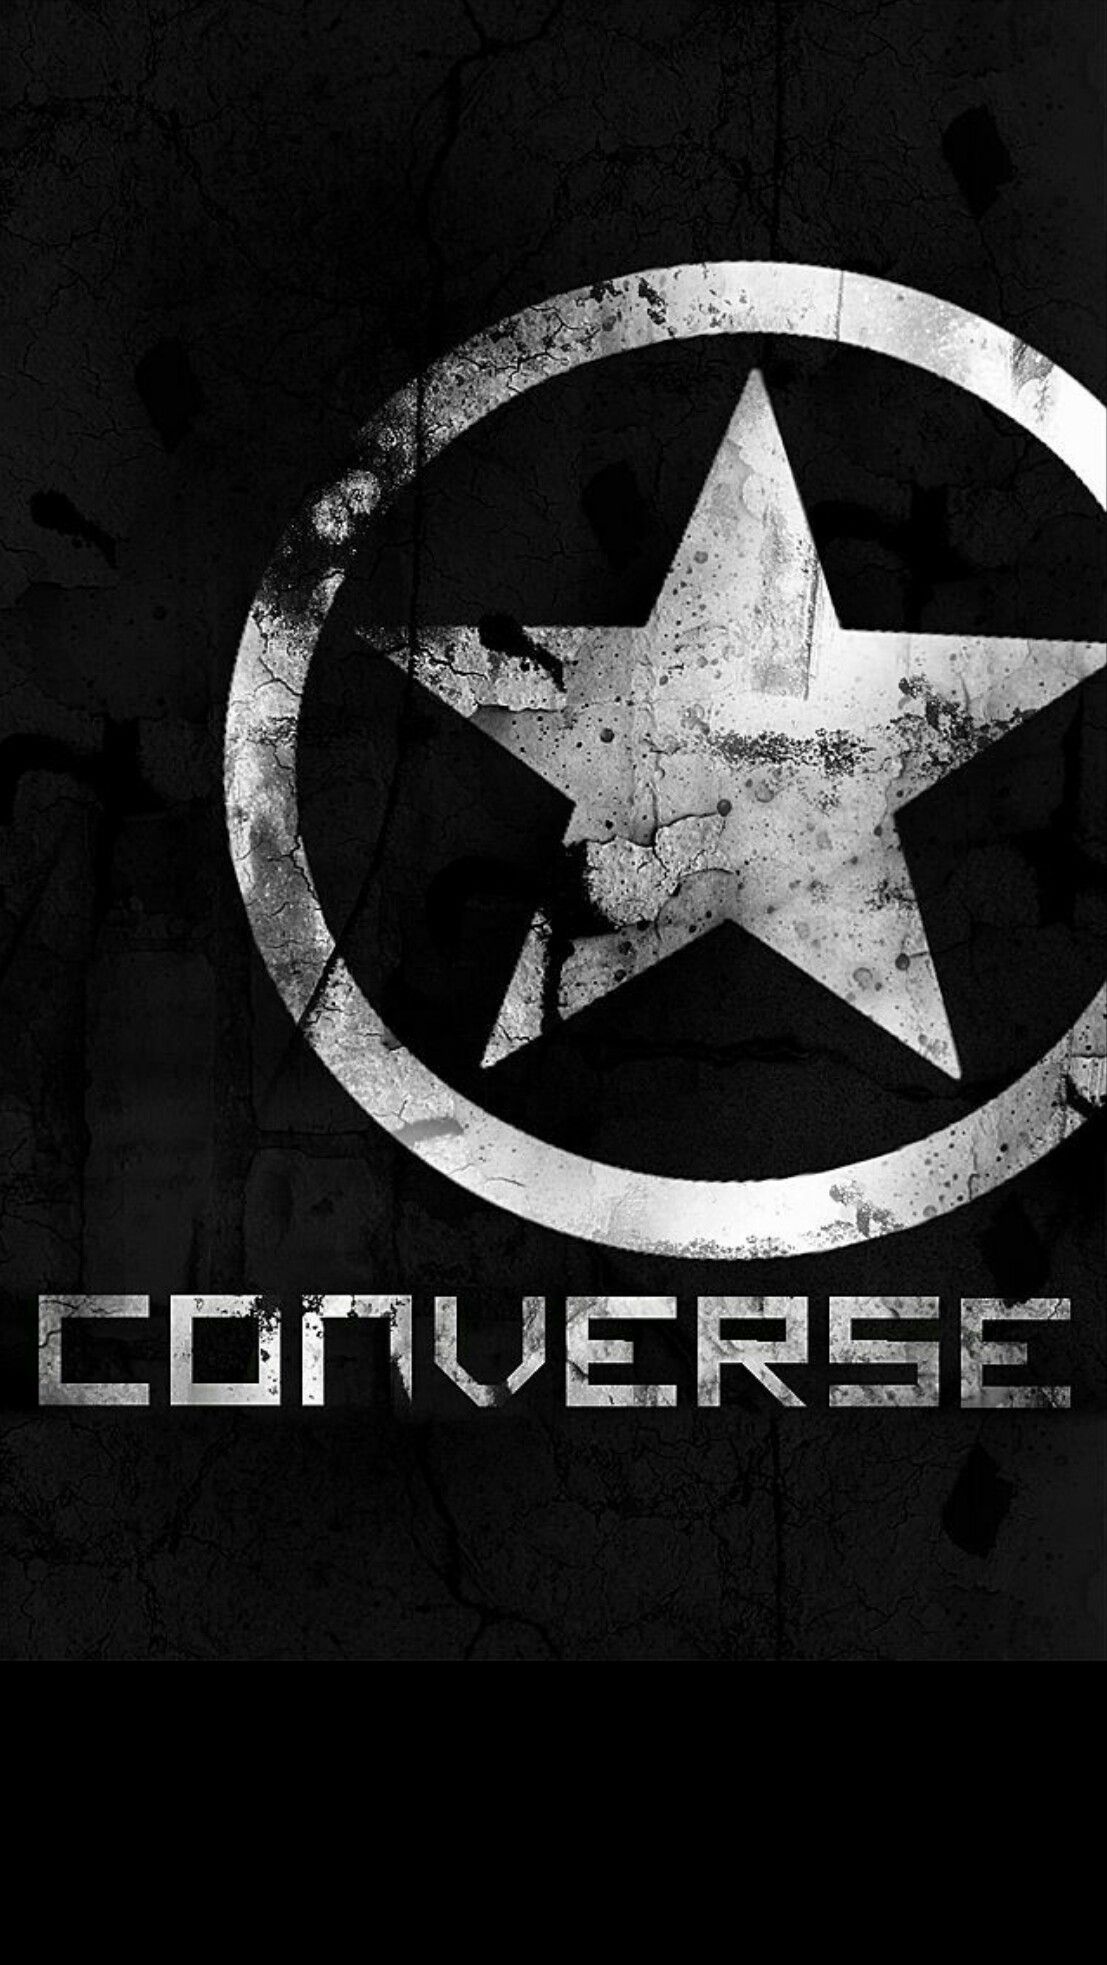 Converse Black Wallpaper iPhone Android Wak